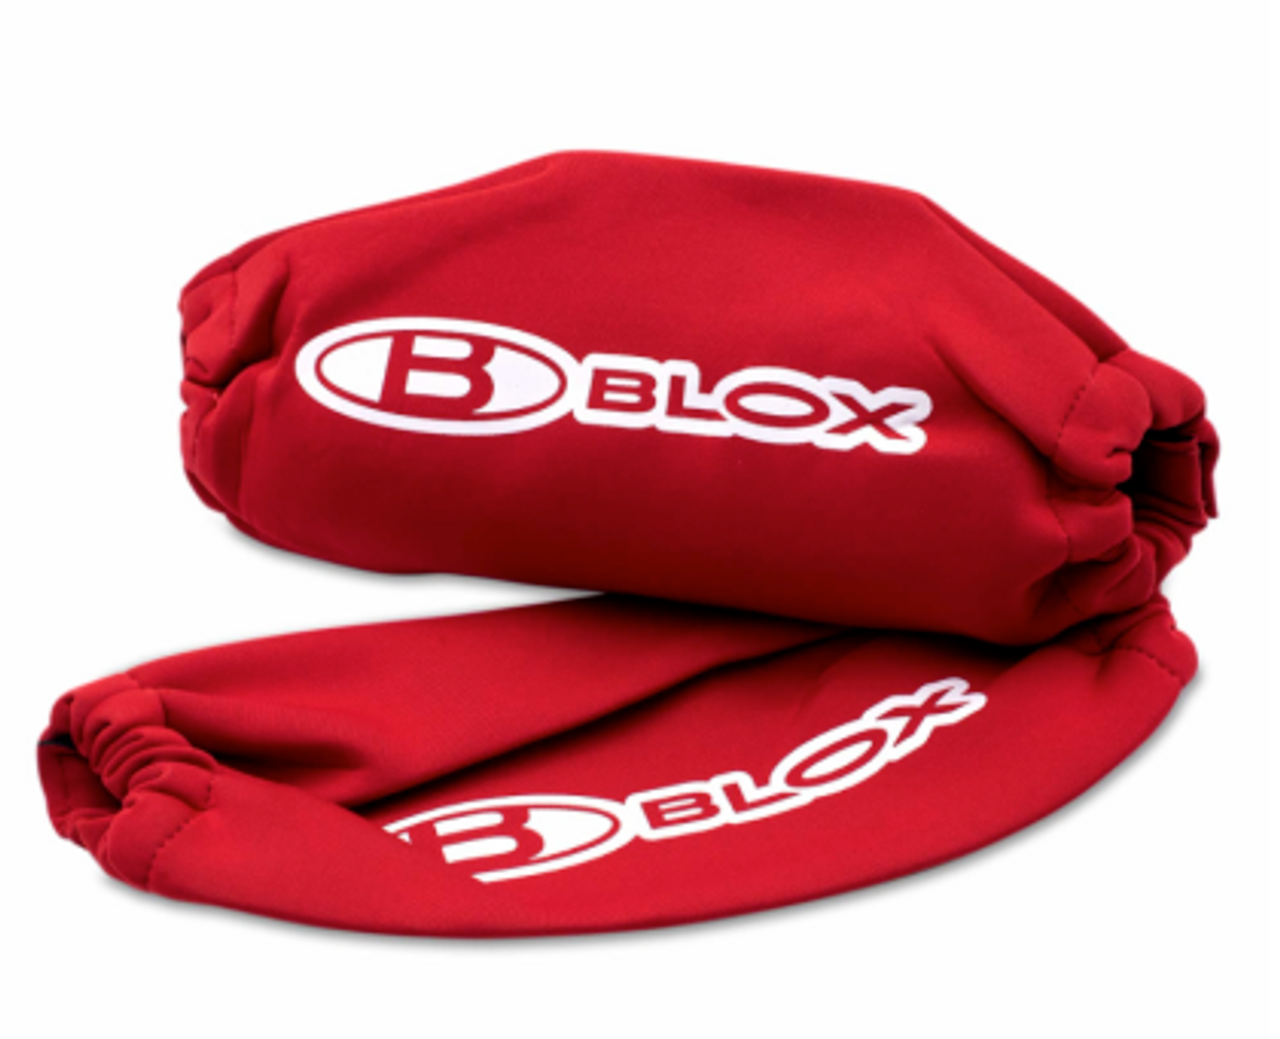 BLOX Racing Neoprene Coilover Covers - Red (Pair)
BXAP-00033-RD